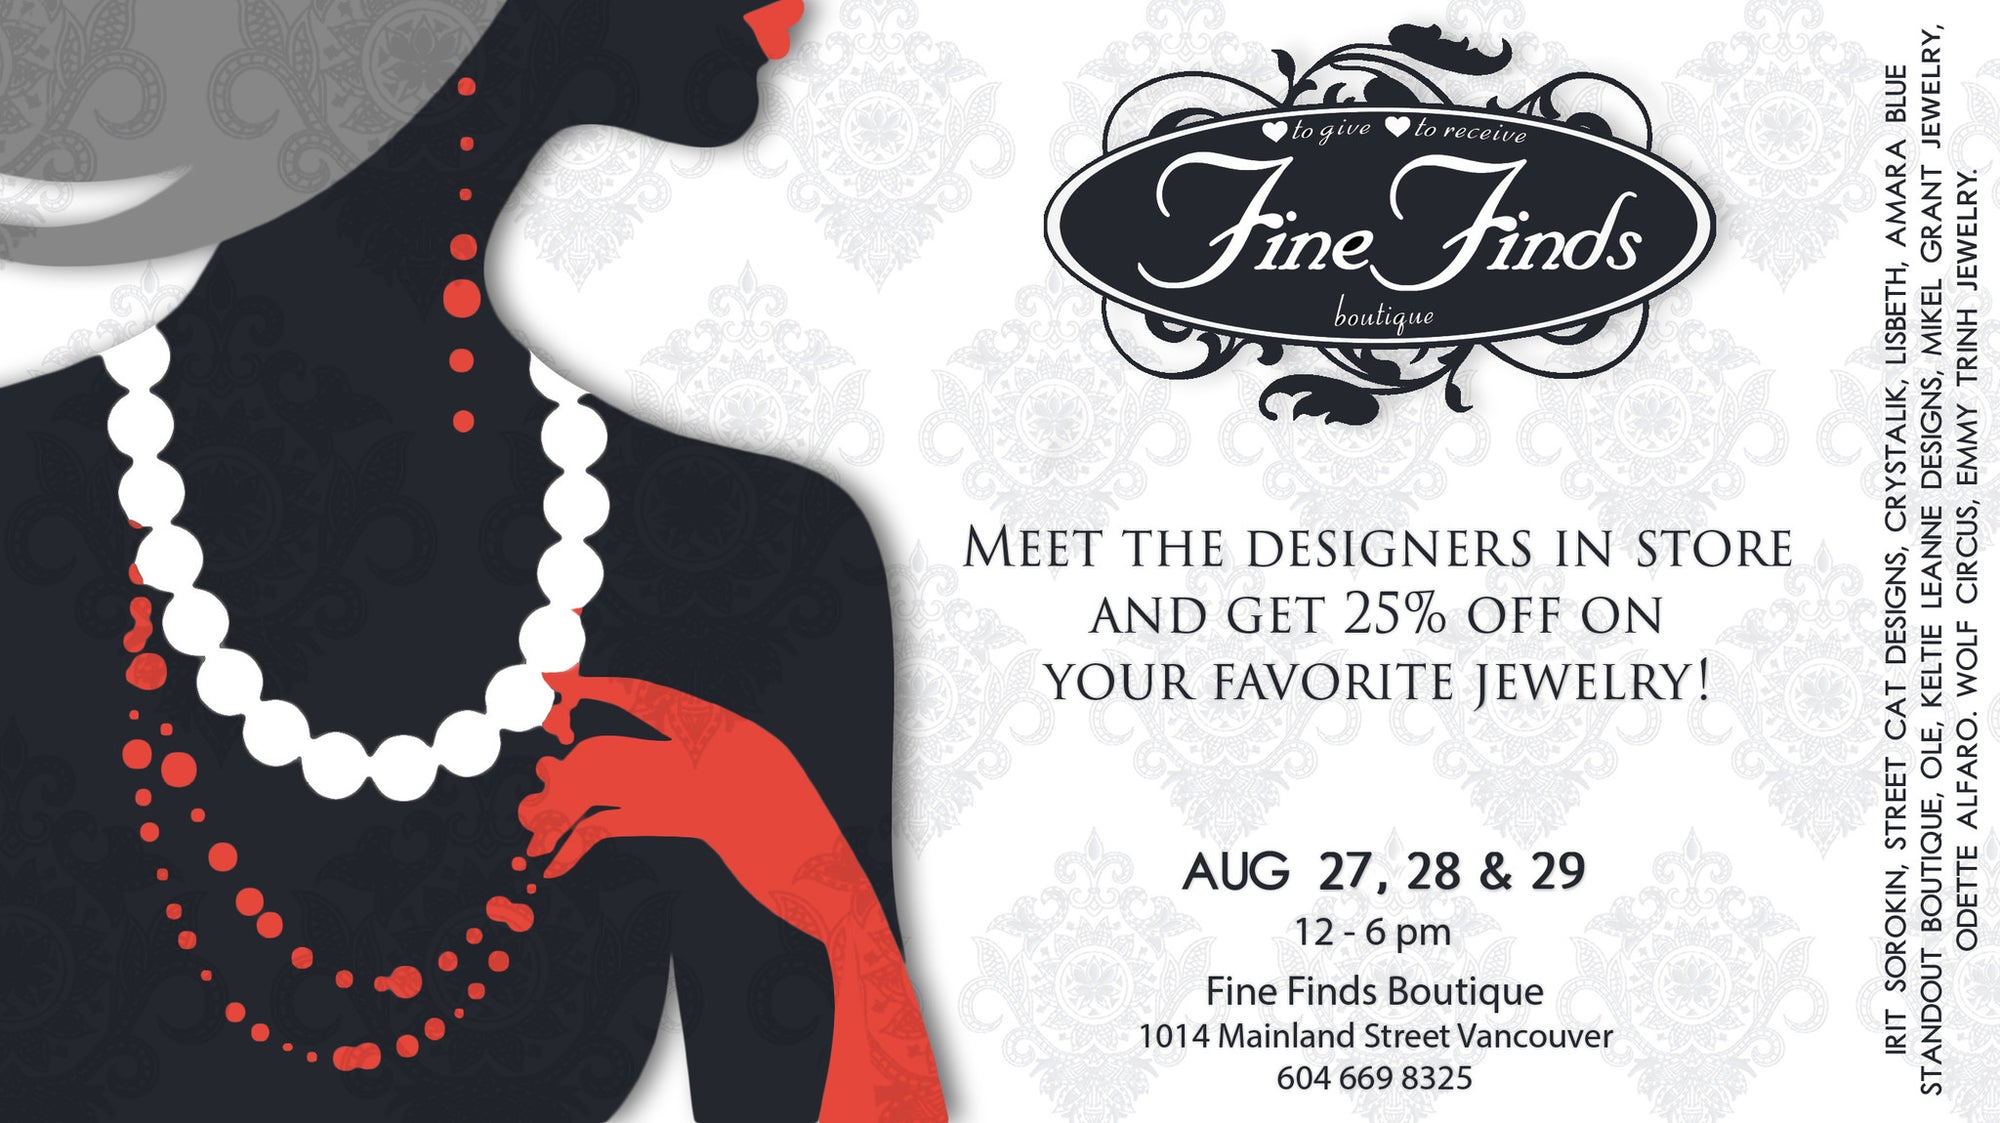 Meet the Designers in store! Aug 28th